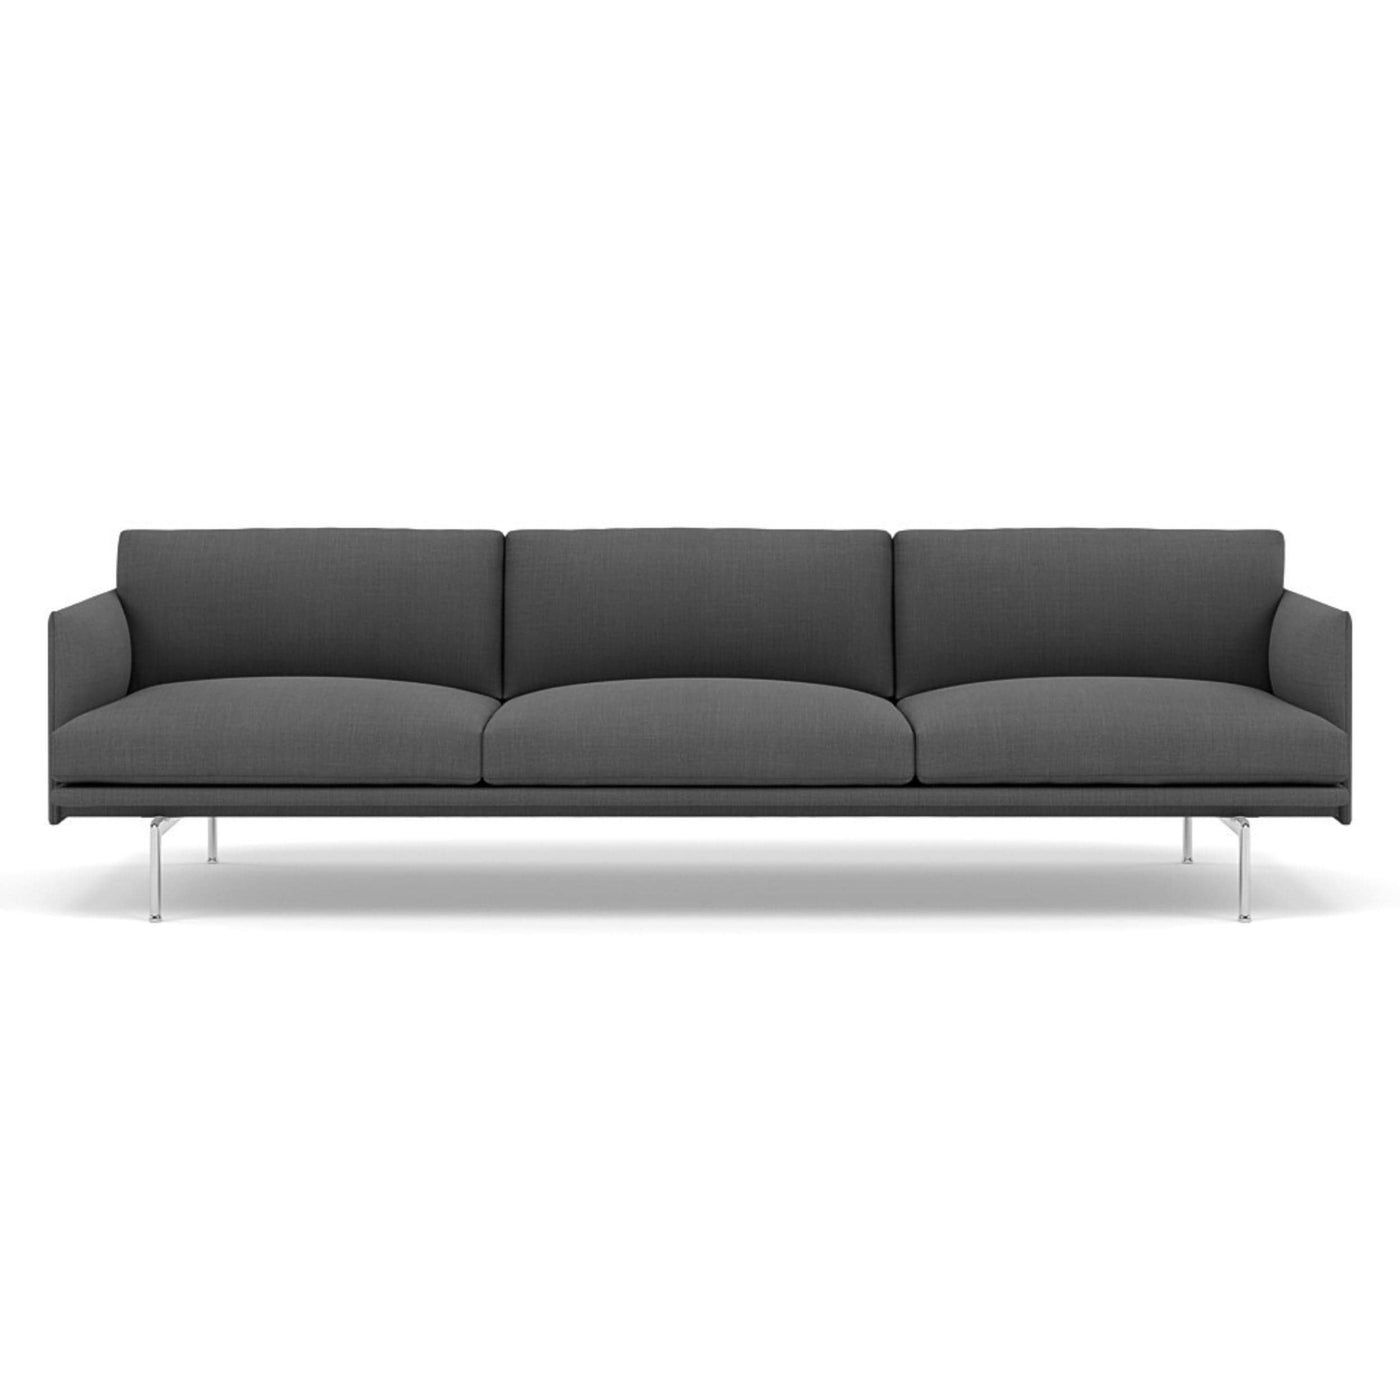 muuto outline 3.5 seater sofa in remix 163 grey and polished aluminium legs. Made to order from someday designs. #colour_remix-163